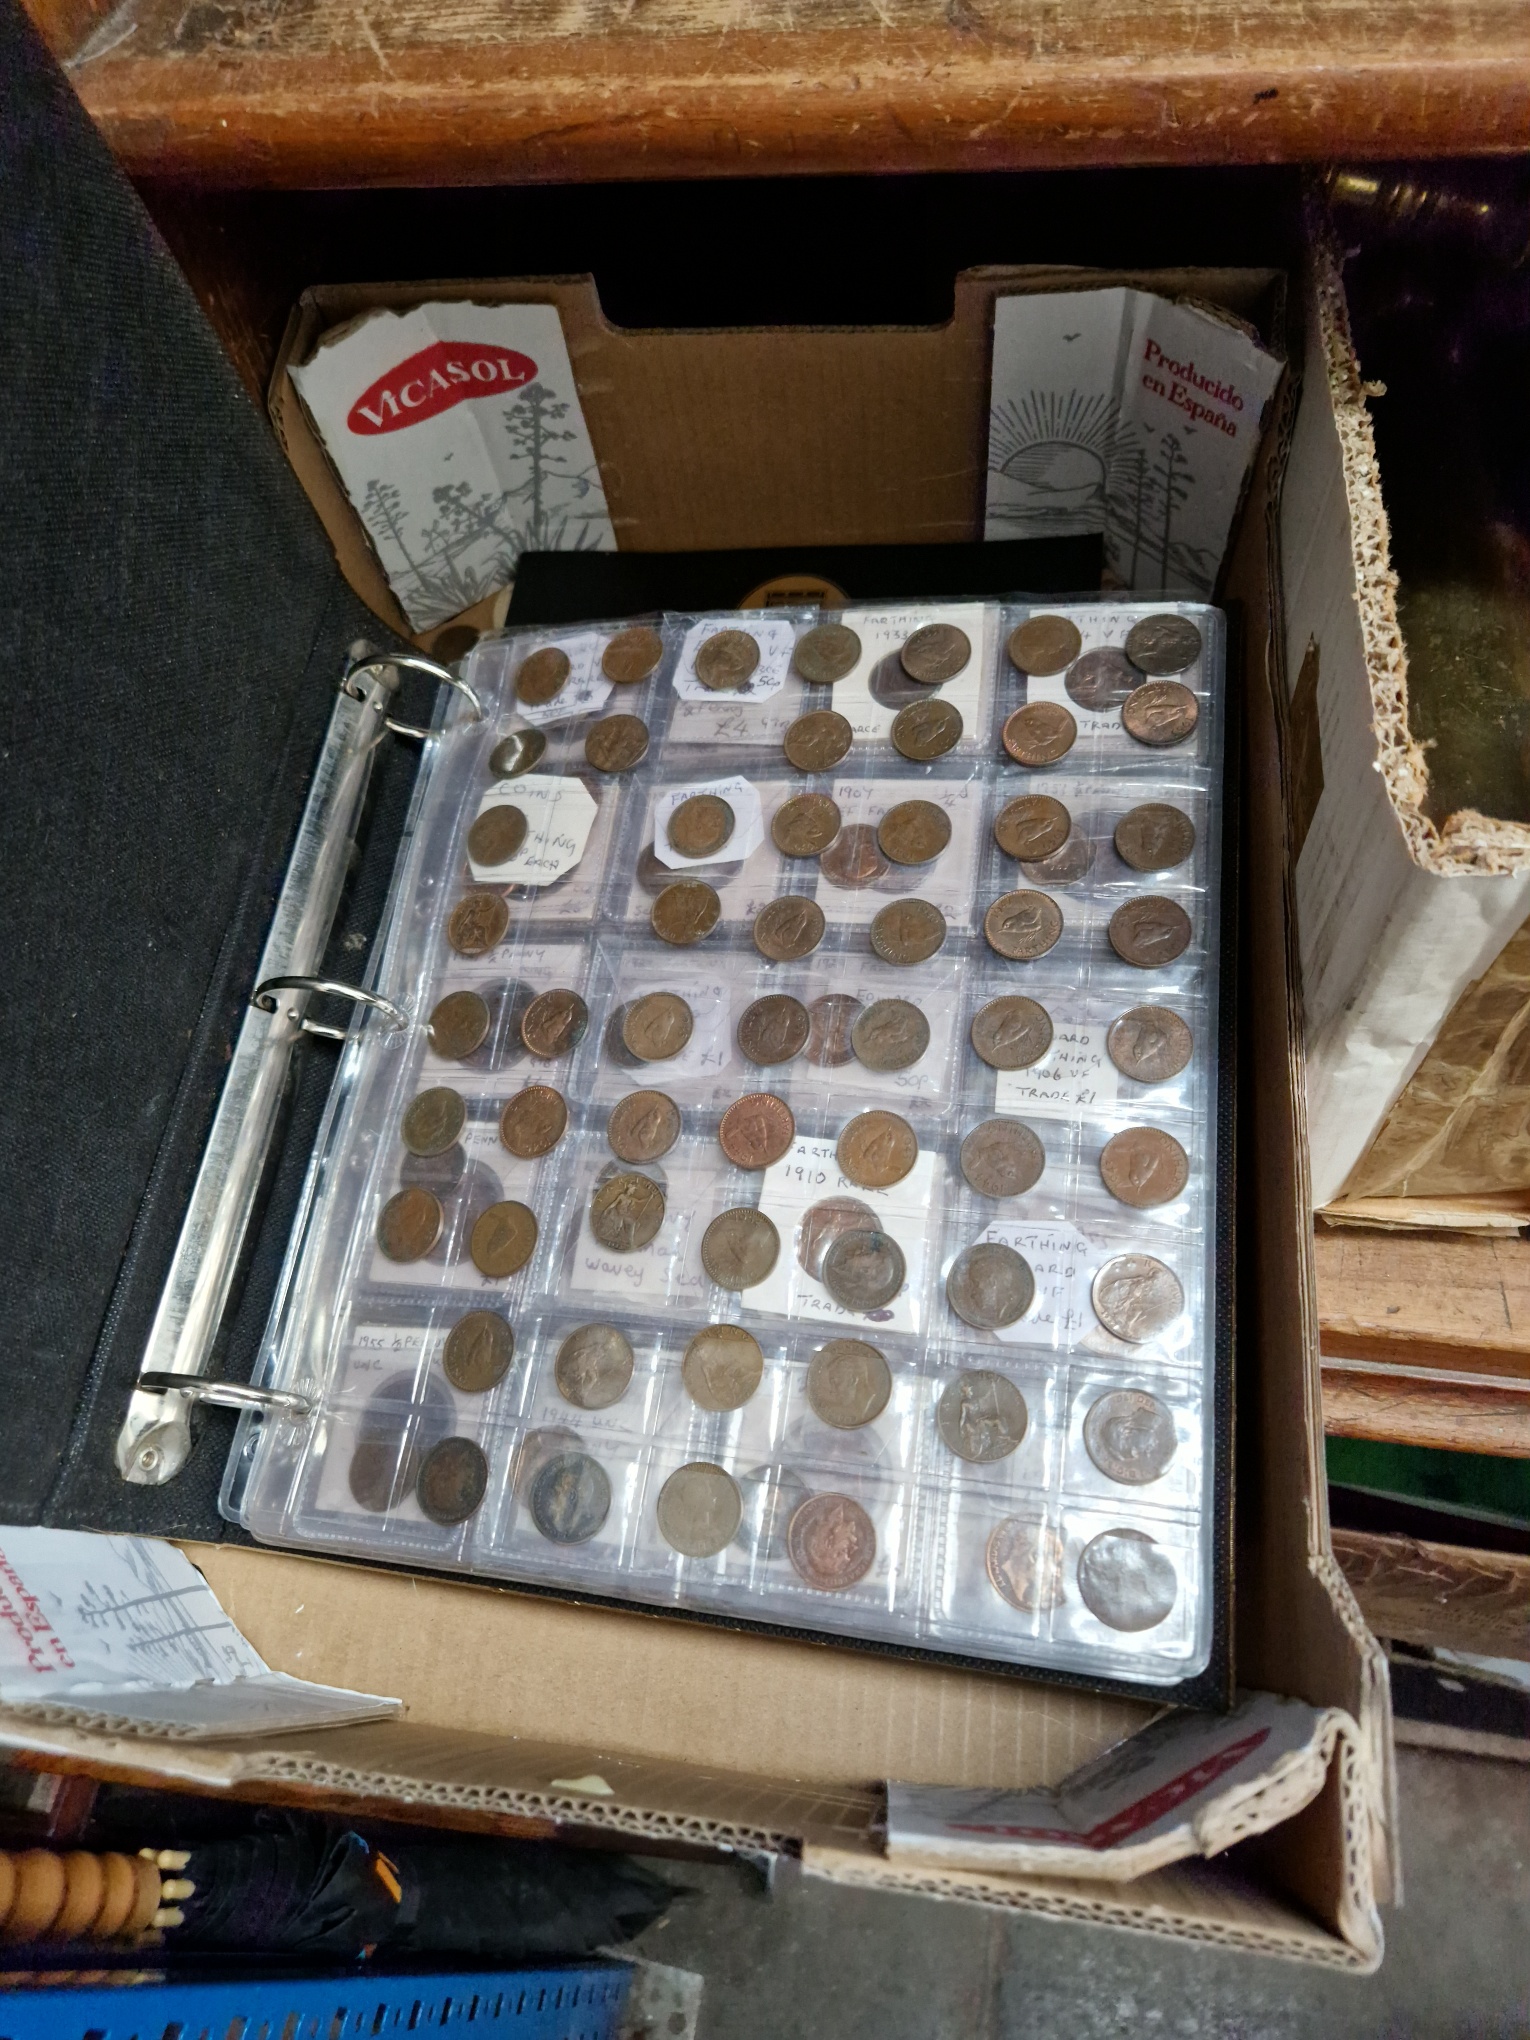 A box of uk coins and world banknotes etc.